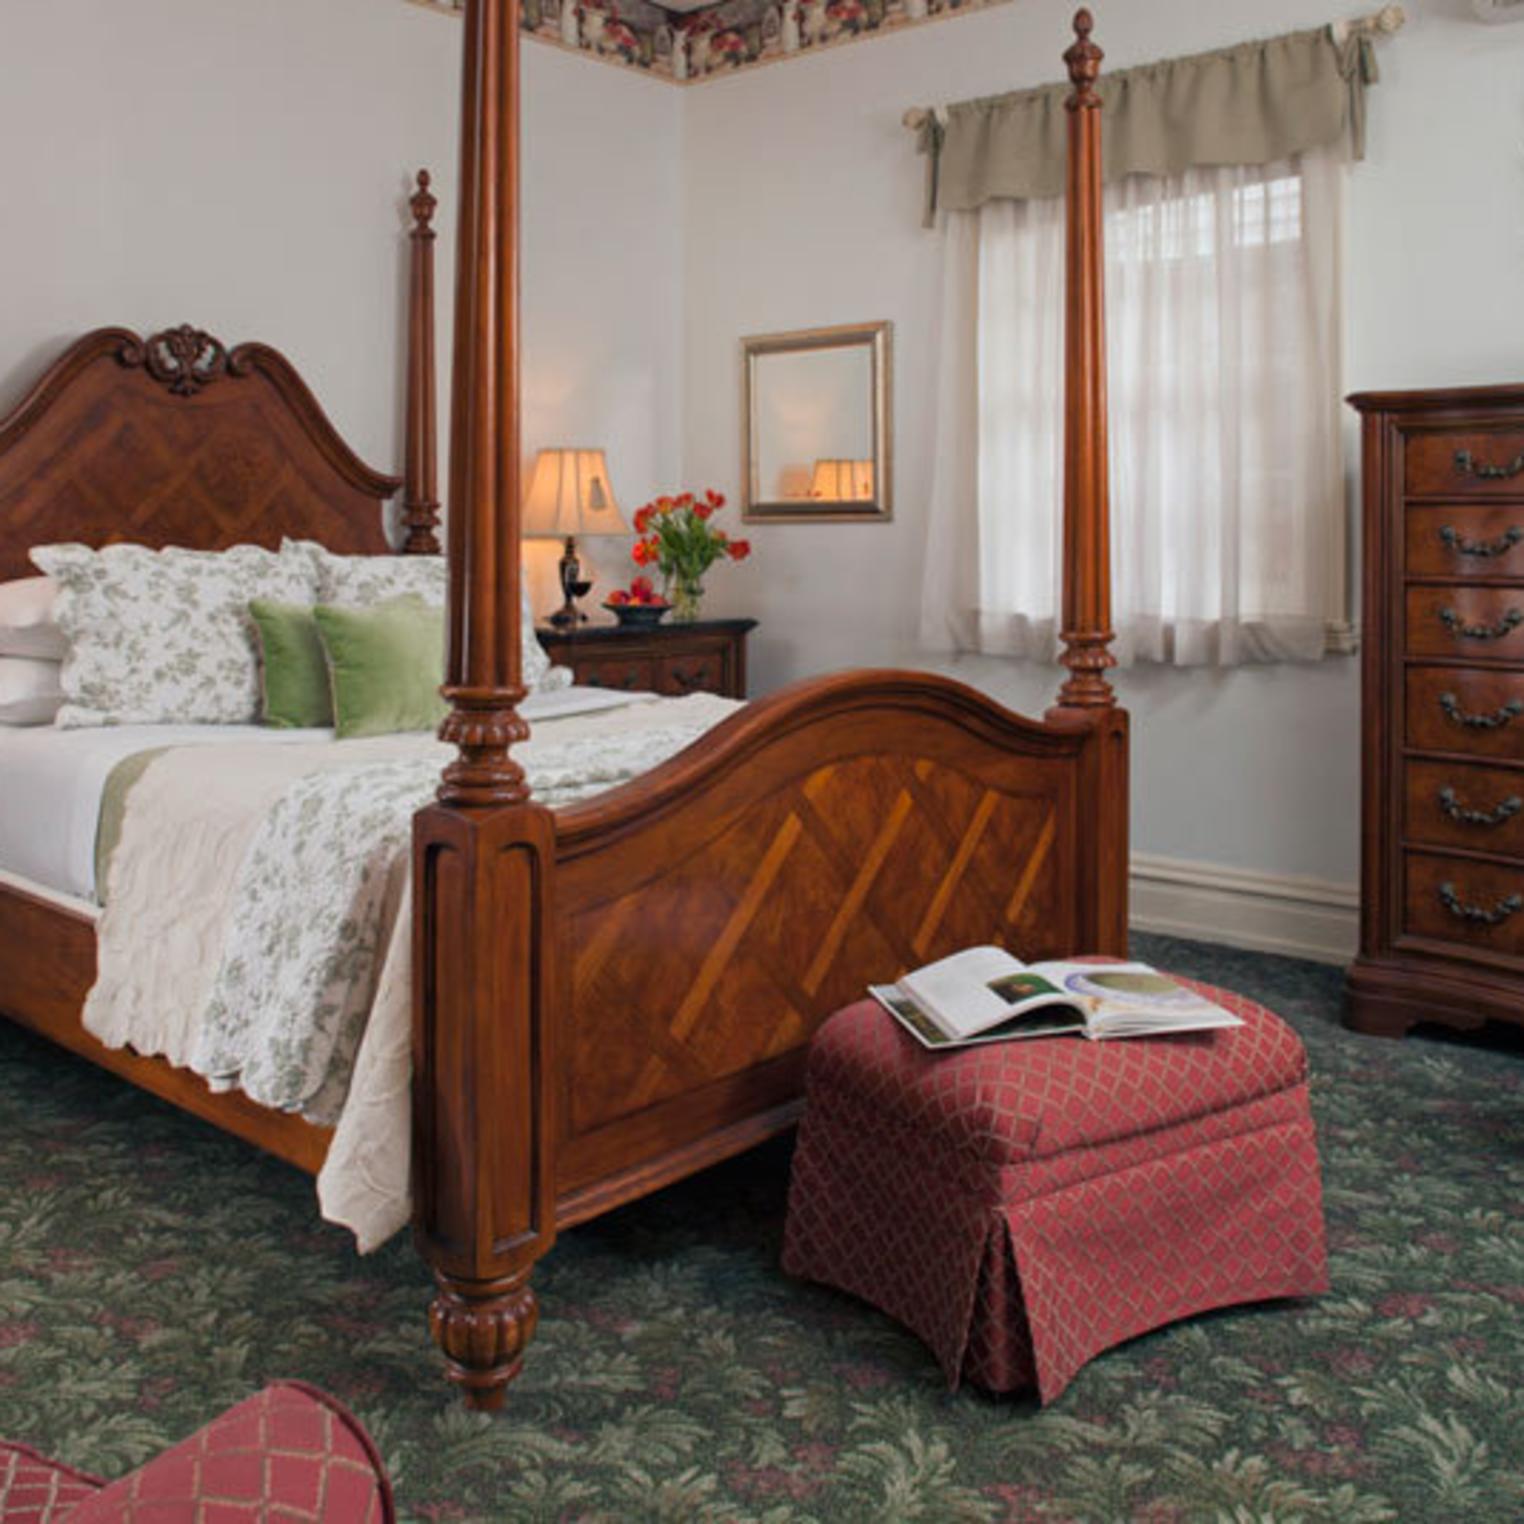 Queen-sized Bed in the Anna Woods Room